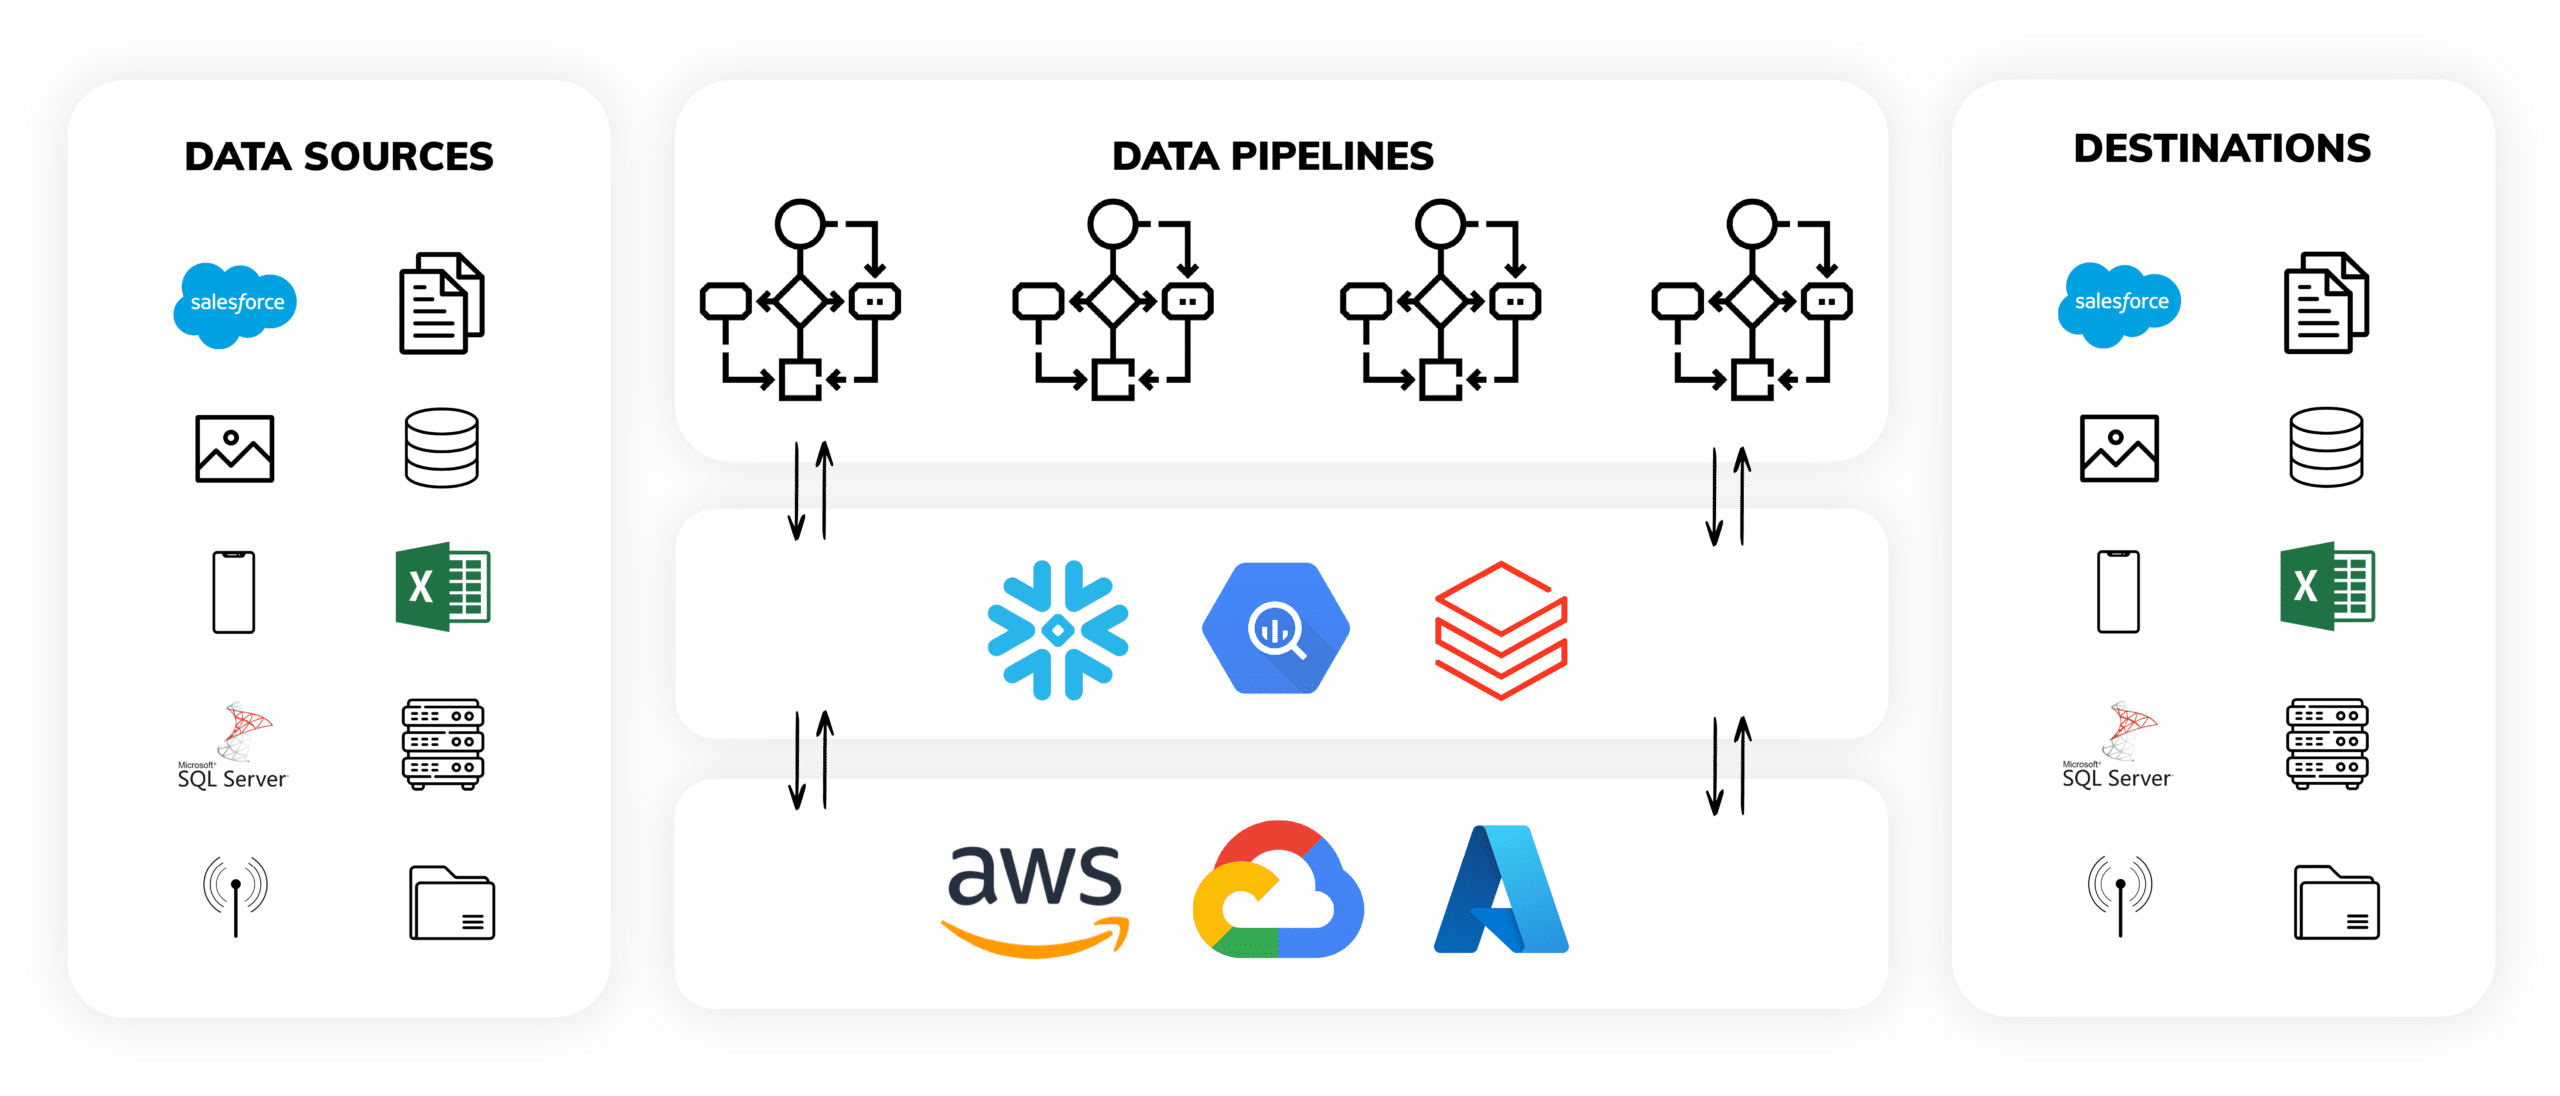 Diagram to represent how Ascend, the leader in data pipeline automation, handles thousands of intelligent data pipelines in a single pane of glass.